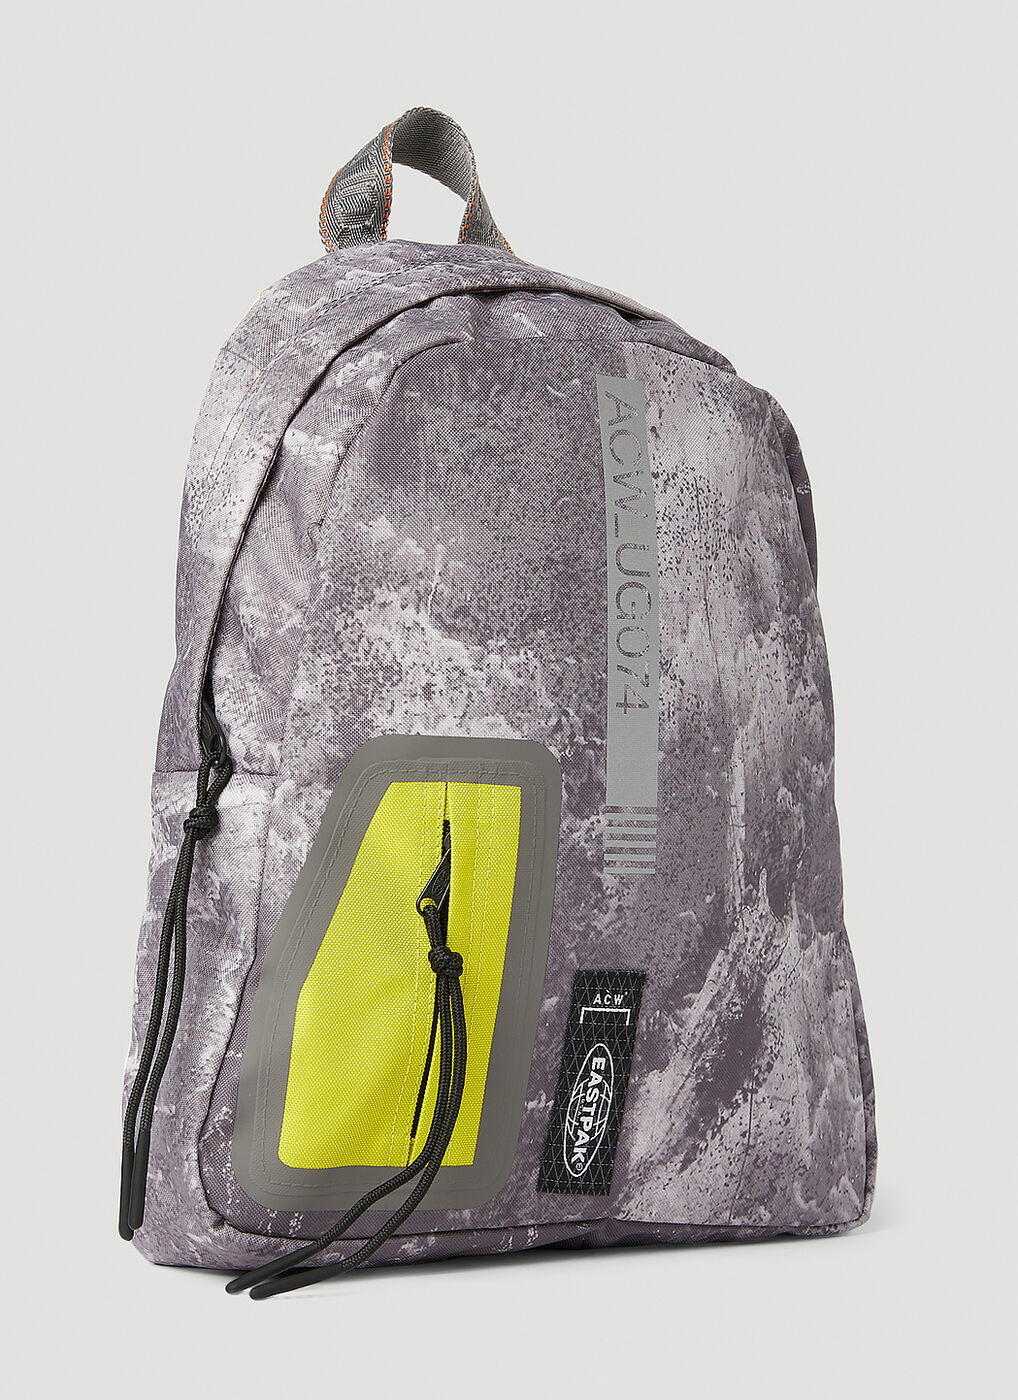 matig zijn diepgaand A-COLD-WALL* x Eastpak - Greyscale Small Backpack in Light Grey A-Cold-Wall*